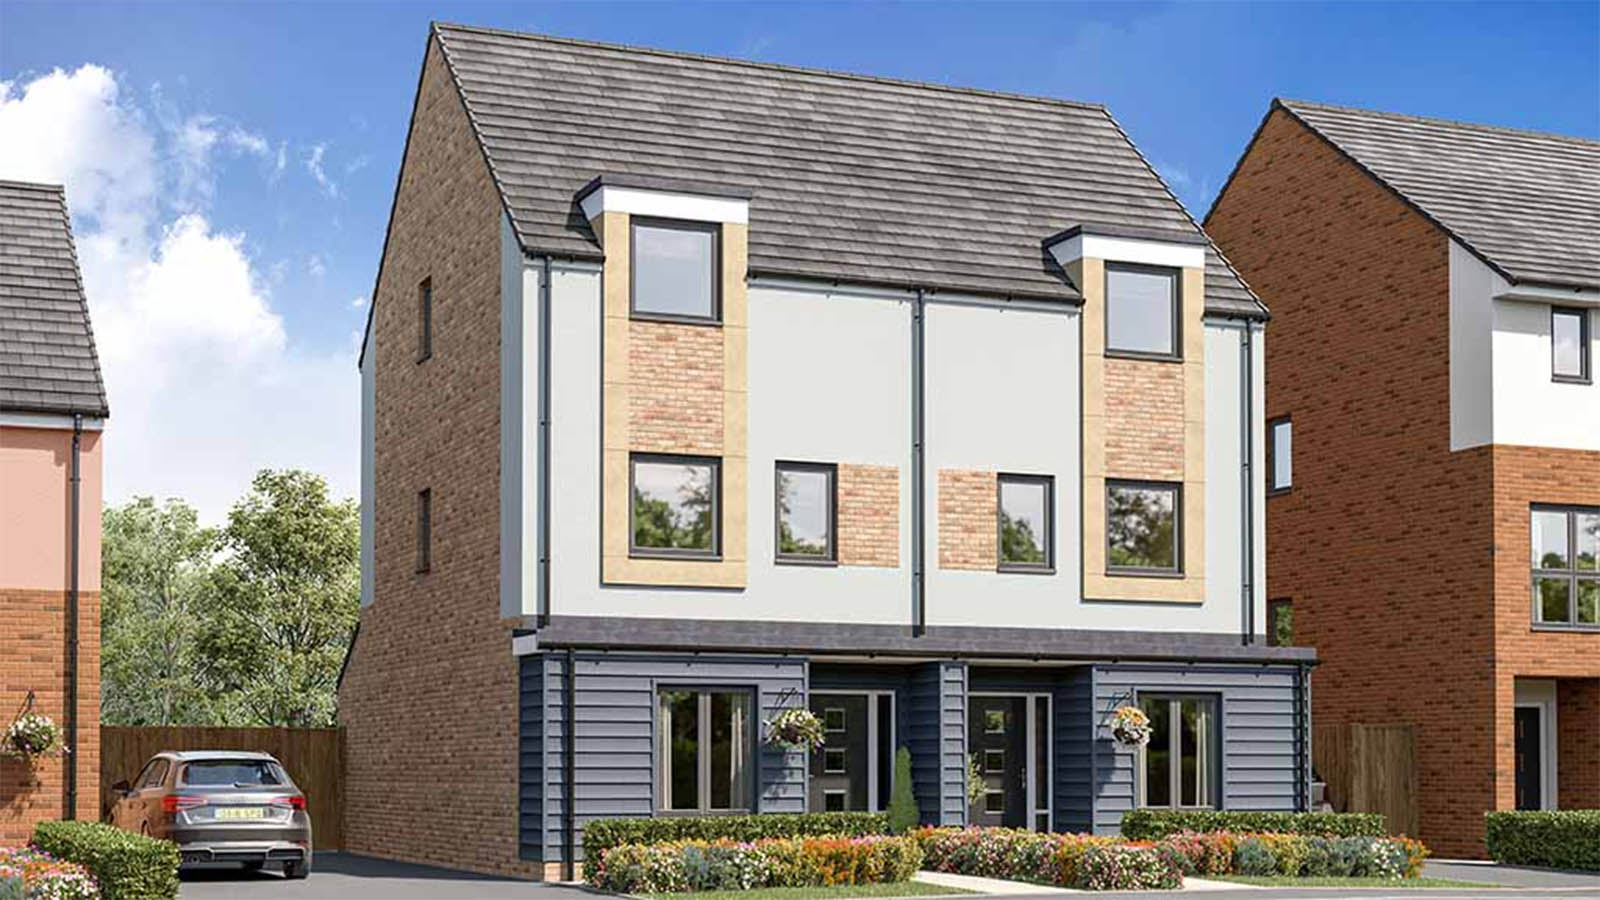 ‘The Chesters’ from Keepmoat Homes at The Rise